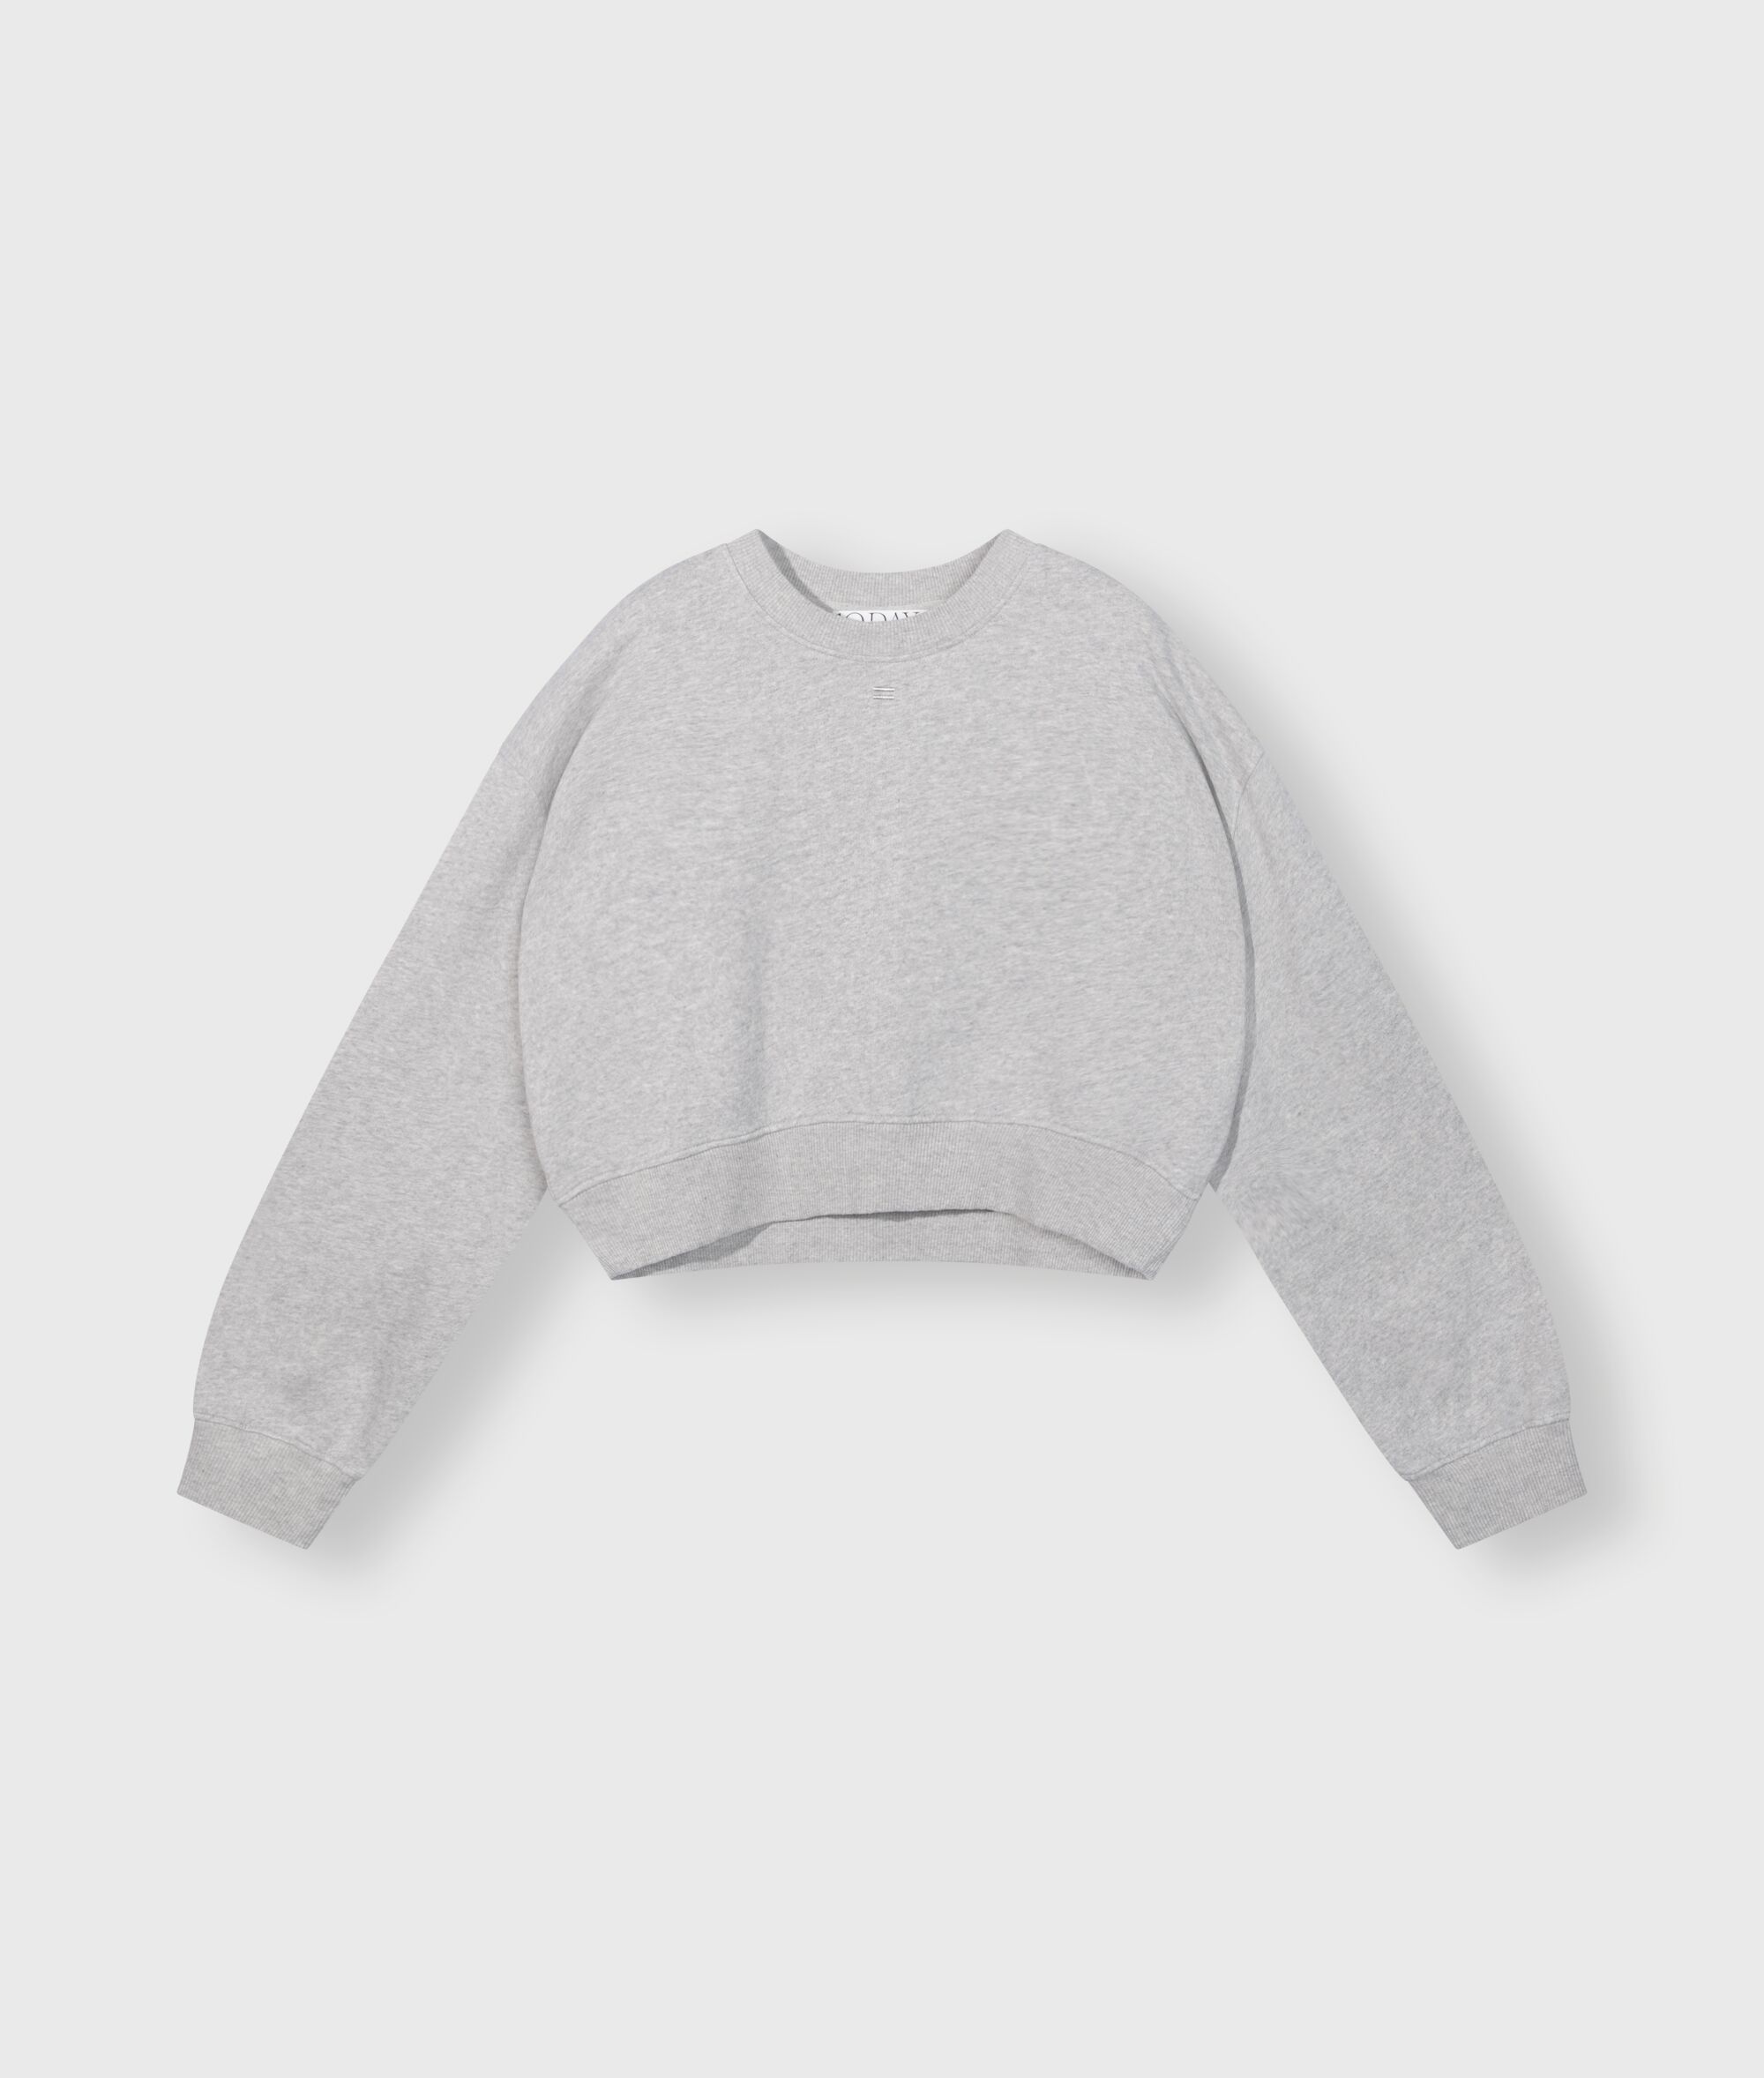 20 801 4203 4001 10days Amsterdam Cropped Sweater Light Grey Melee (2)